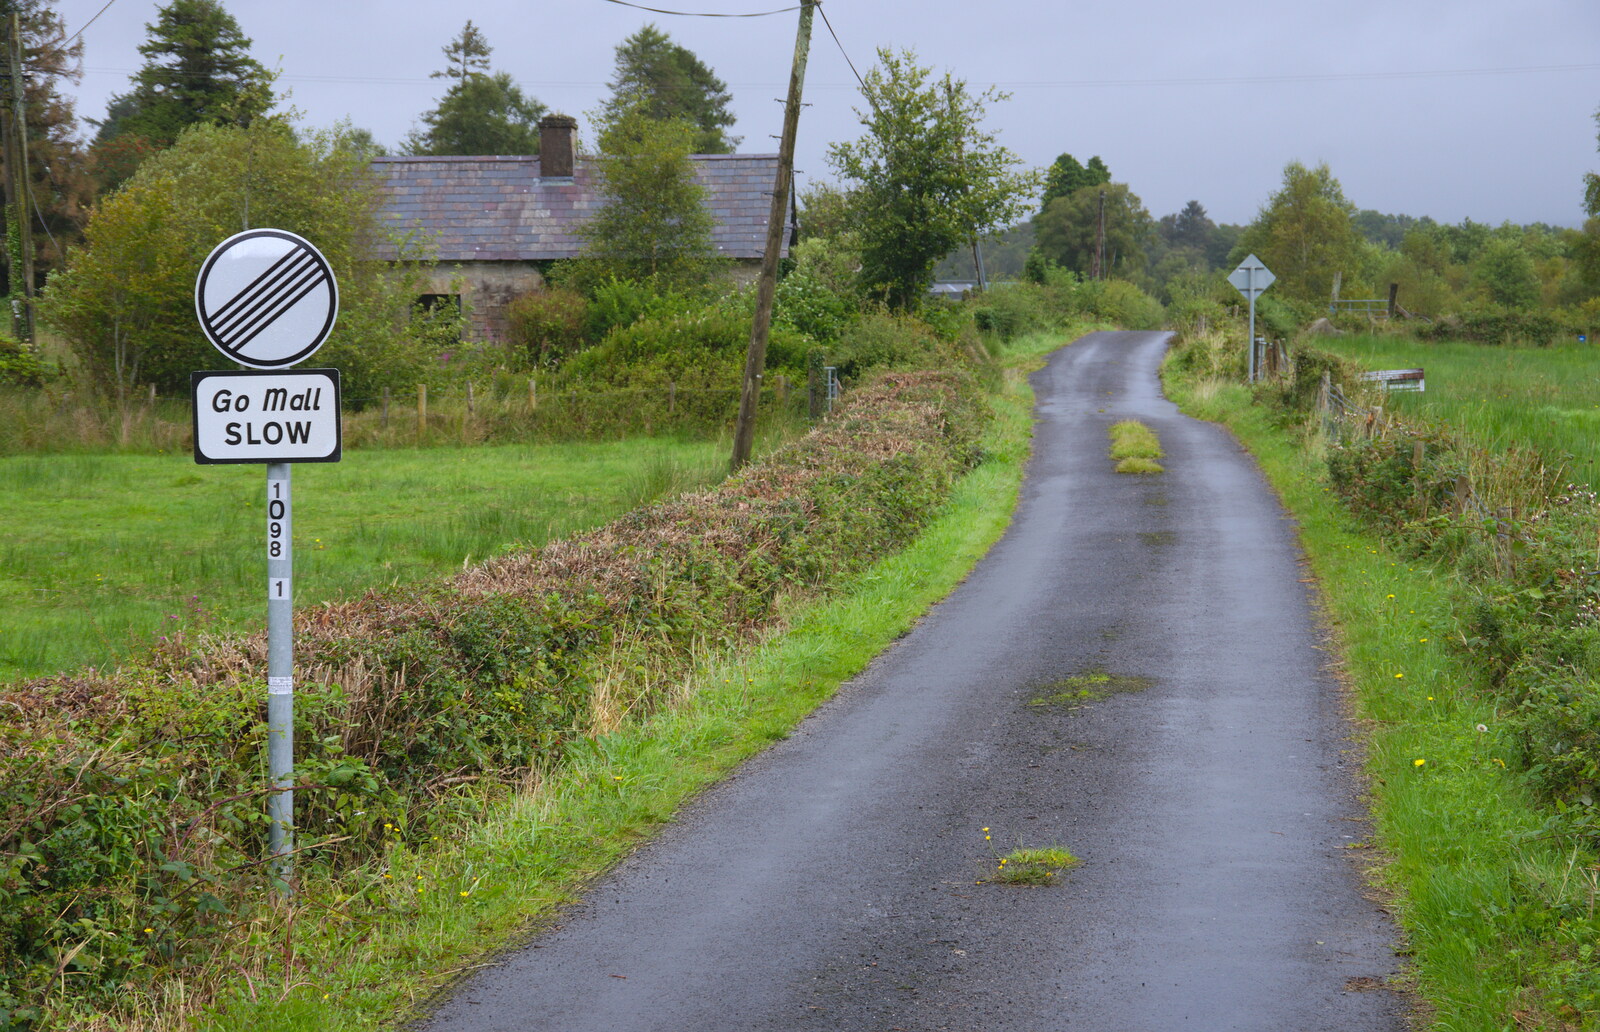 A lane with grass up the middle and 'go mall' from Travels in the Borderlands: An Blaic/Blacklion to Belcoo and back, Cavan and Fermanagh, Ireland - 22nd August 2019